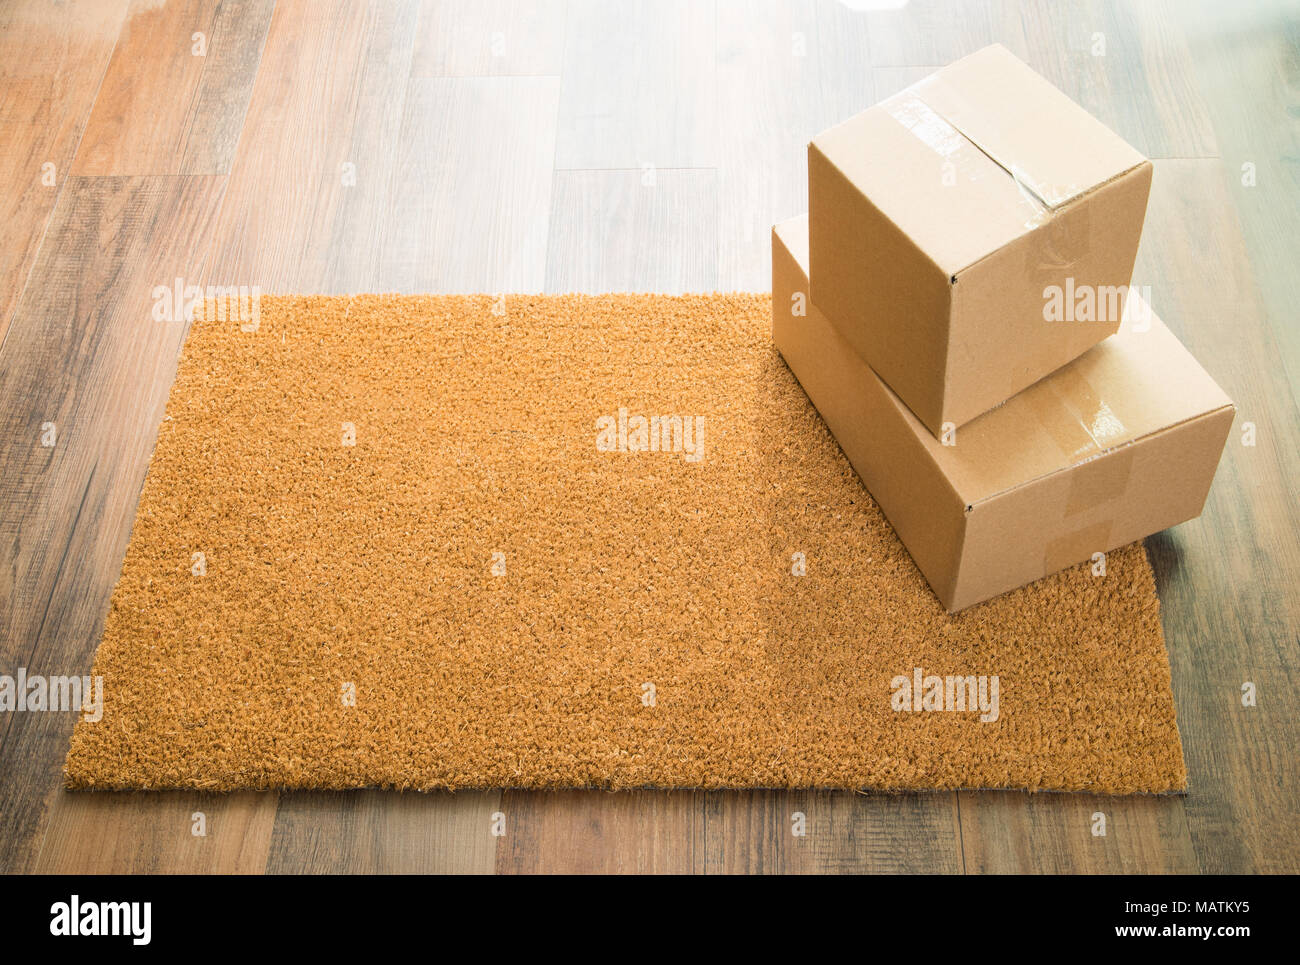 Blank Welcome Mat On Wood Floor With Shipment of Boxes. Stock Photo